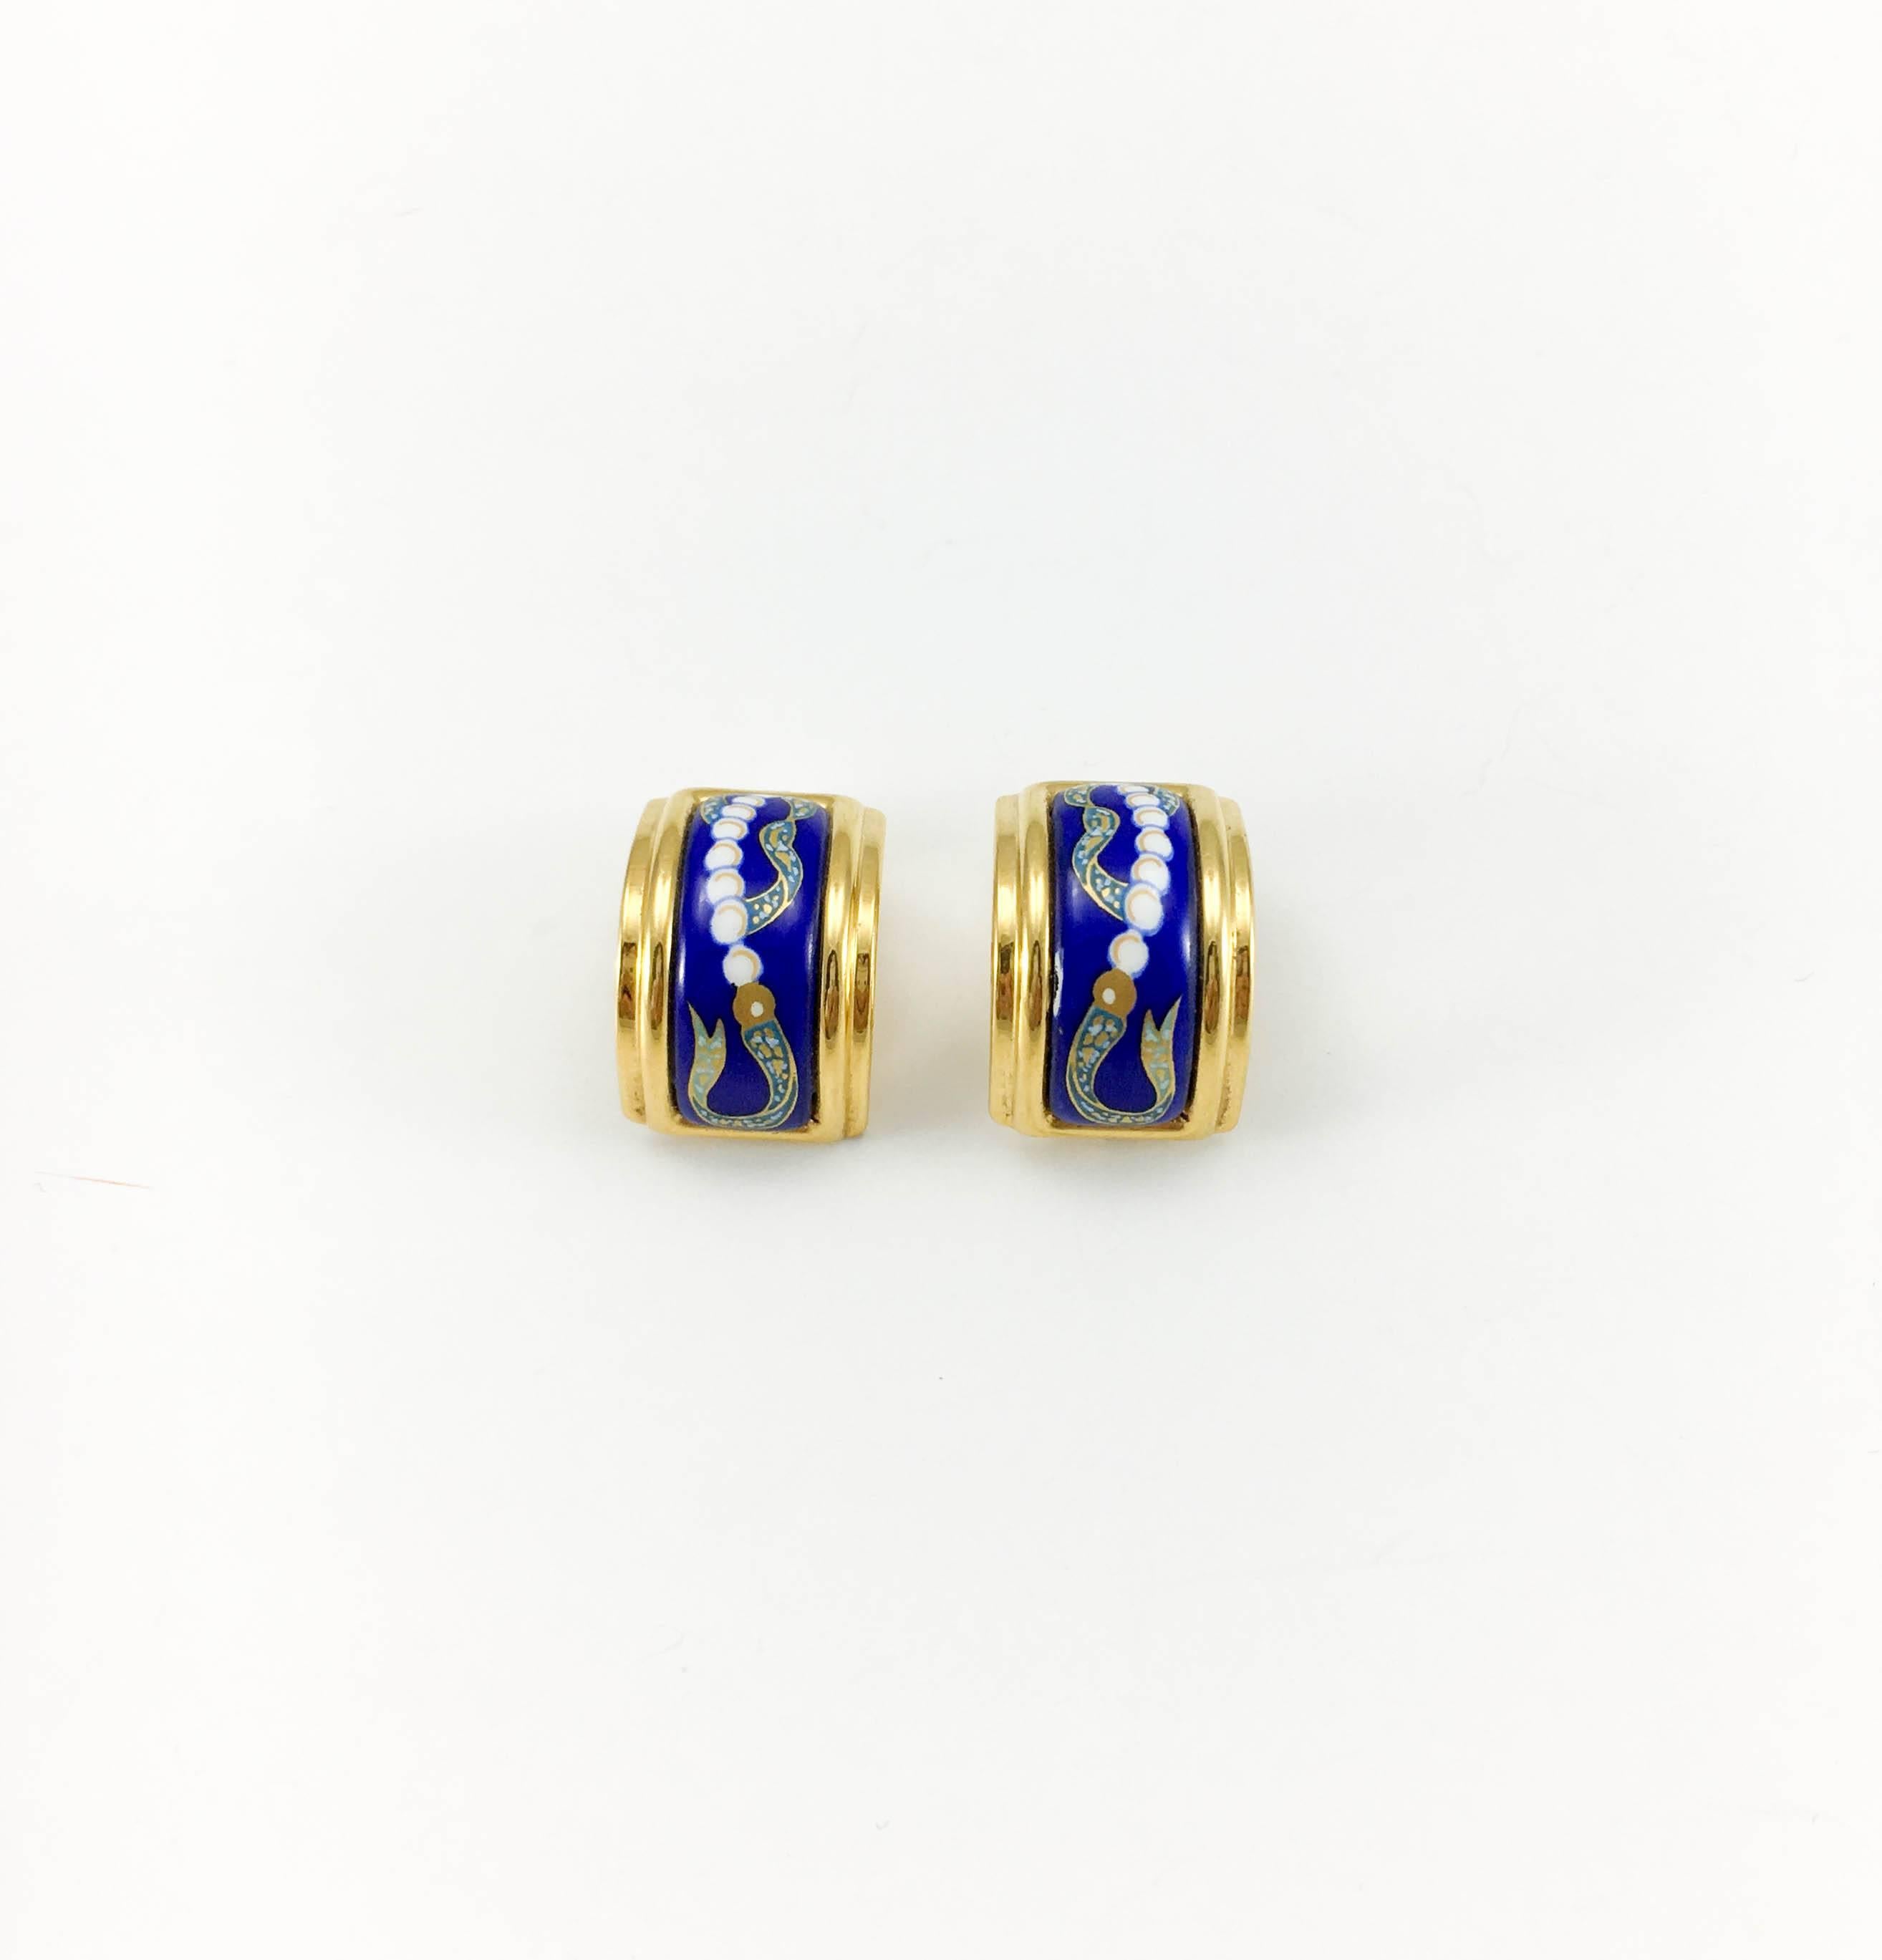 Vintage Hermes Enamelled Clip-On Earrings. These fun and stylish earrings by Hermes date back from the 1990’s. They are made in gold-plated metal and enamel in shades of blue, white, green and golden. They are curved and feature an oriental inspired